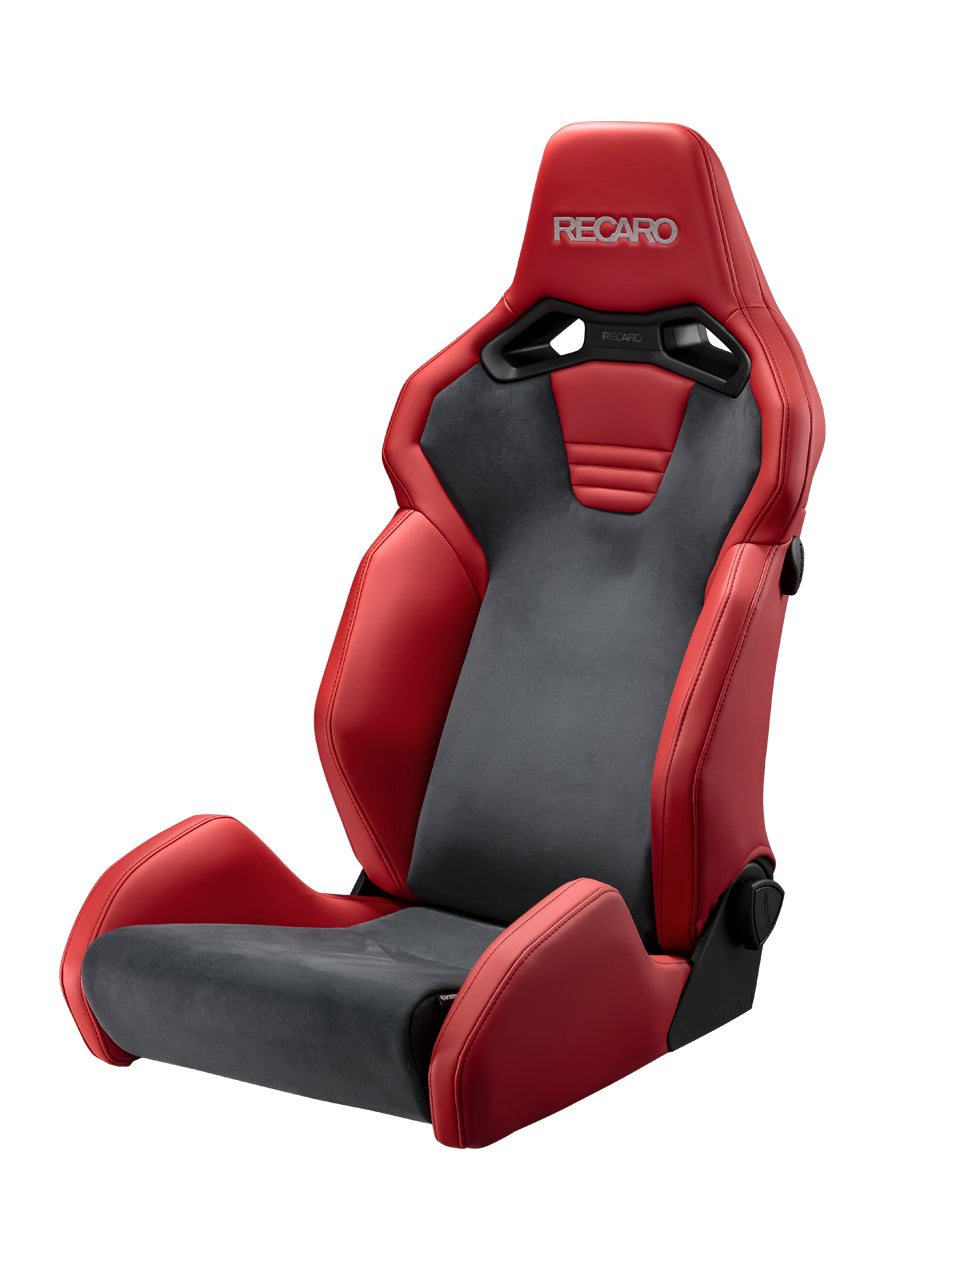 RECARO SR-S UT100 CG RD ULTRA SUEDE CHARCOAL GRAY AND ARTIFICIAL LEATHER RED COLOR SEAT 81-120.20.647-0